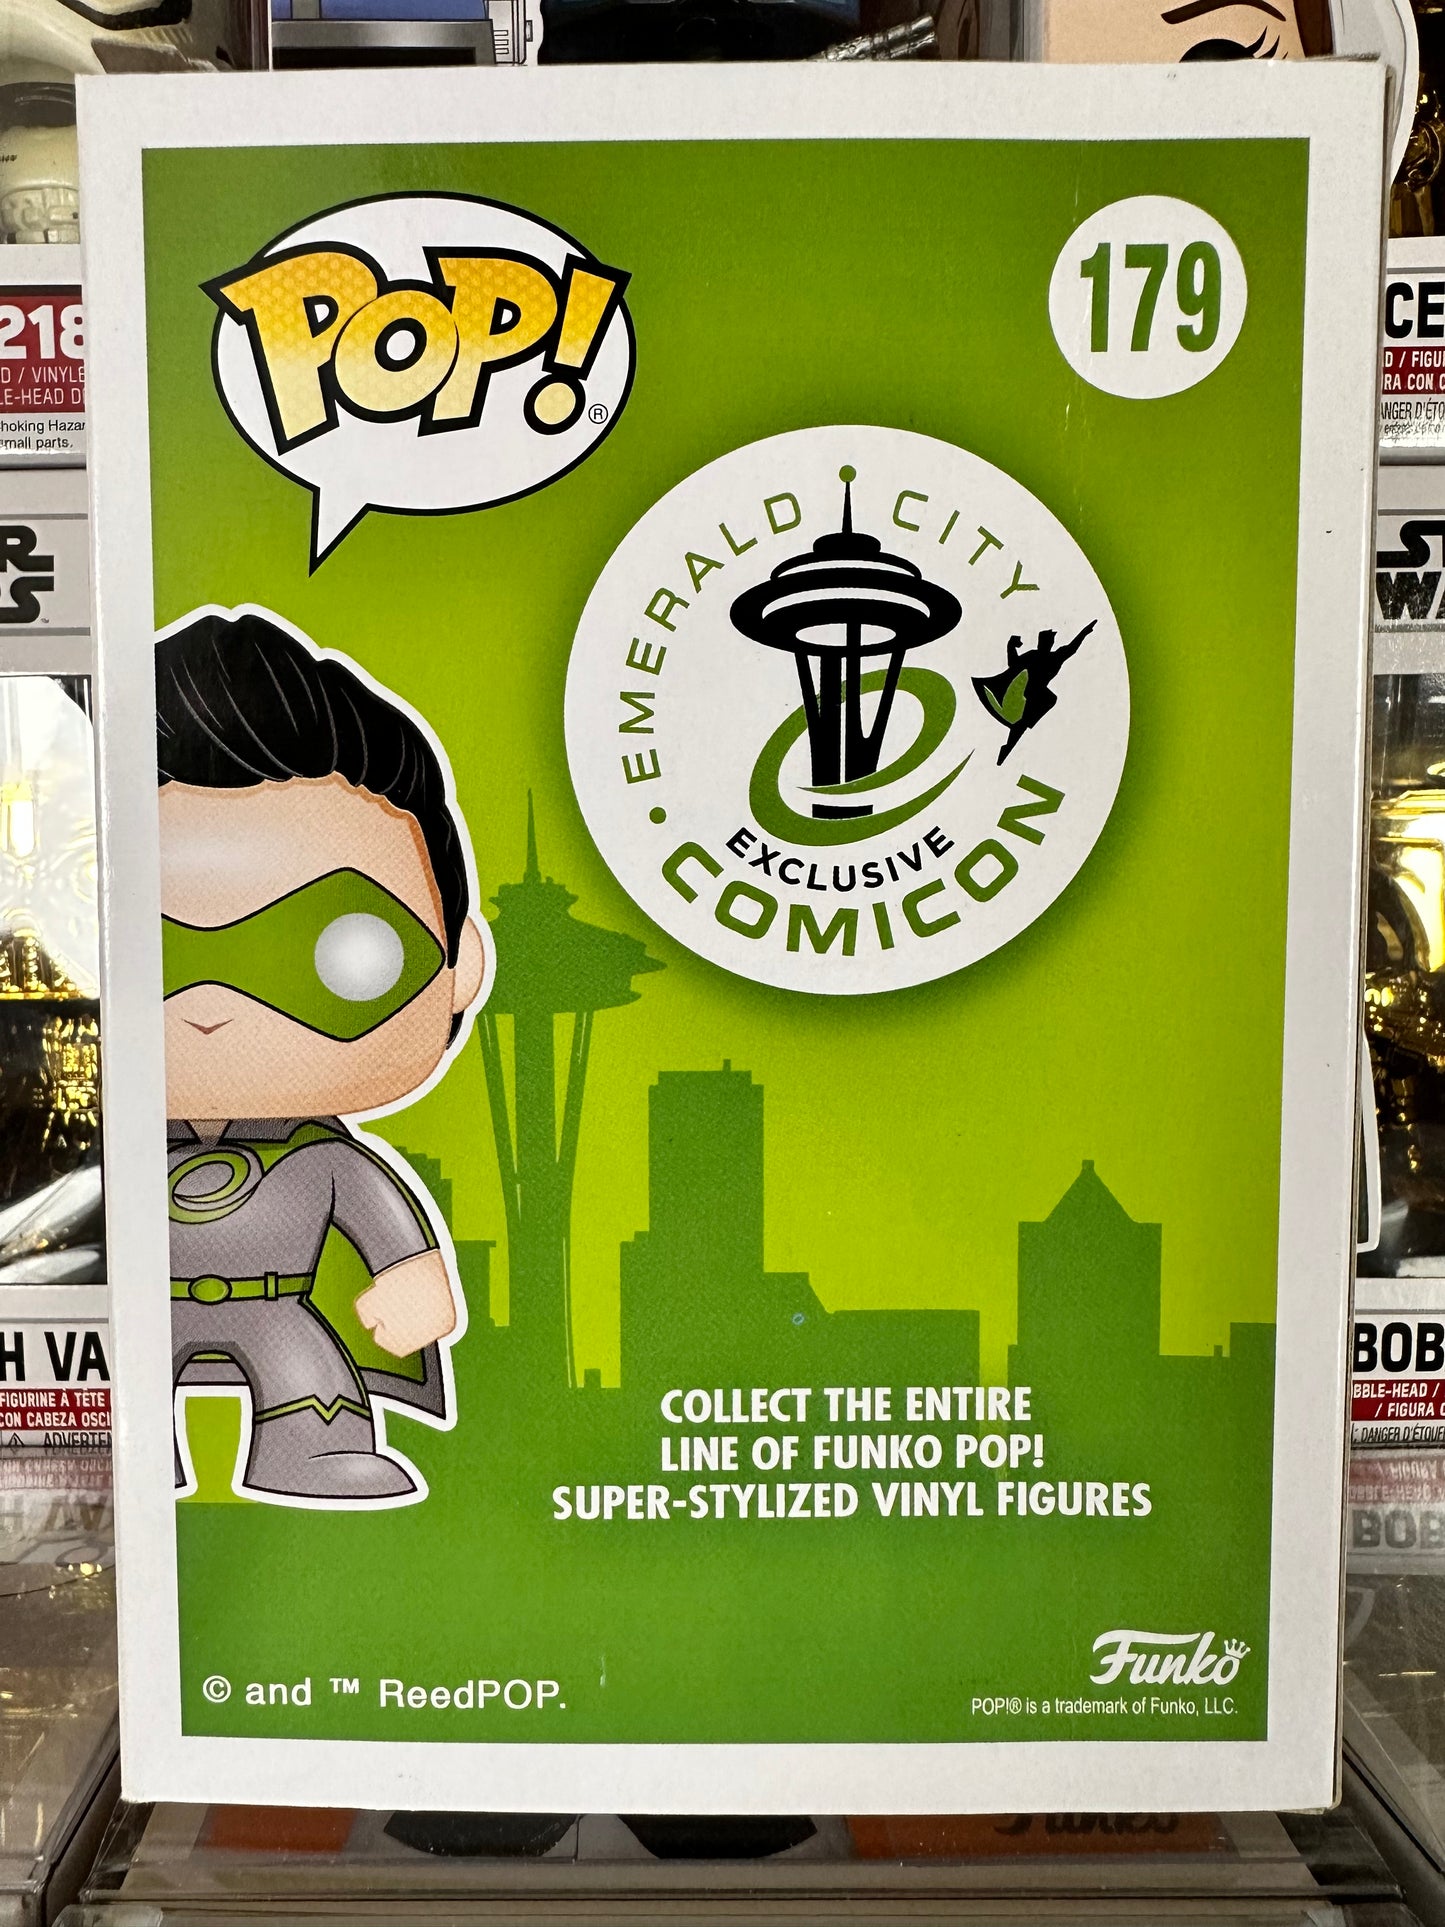 ECCC - Emerald City Crusader (179) [Spring Convention] Vaulted